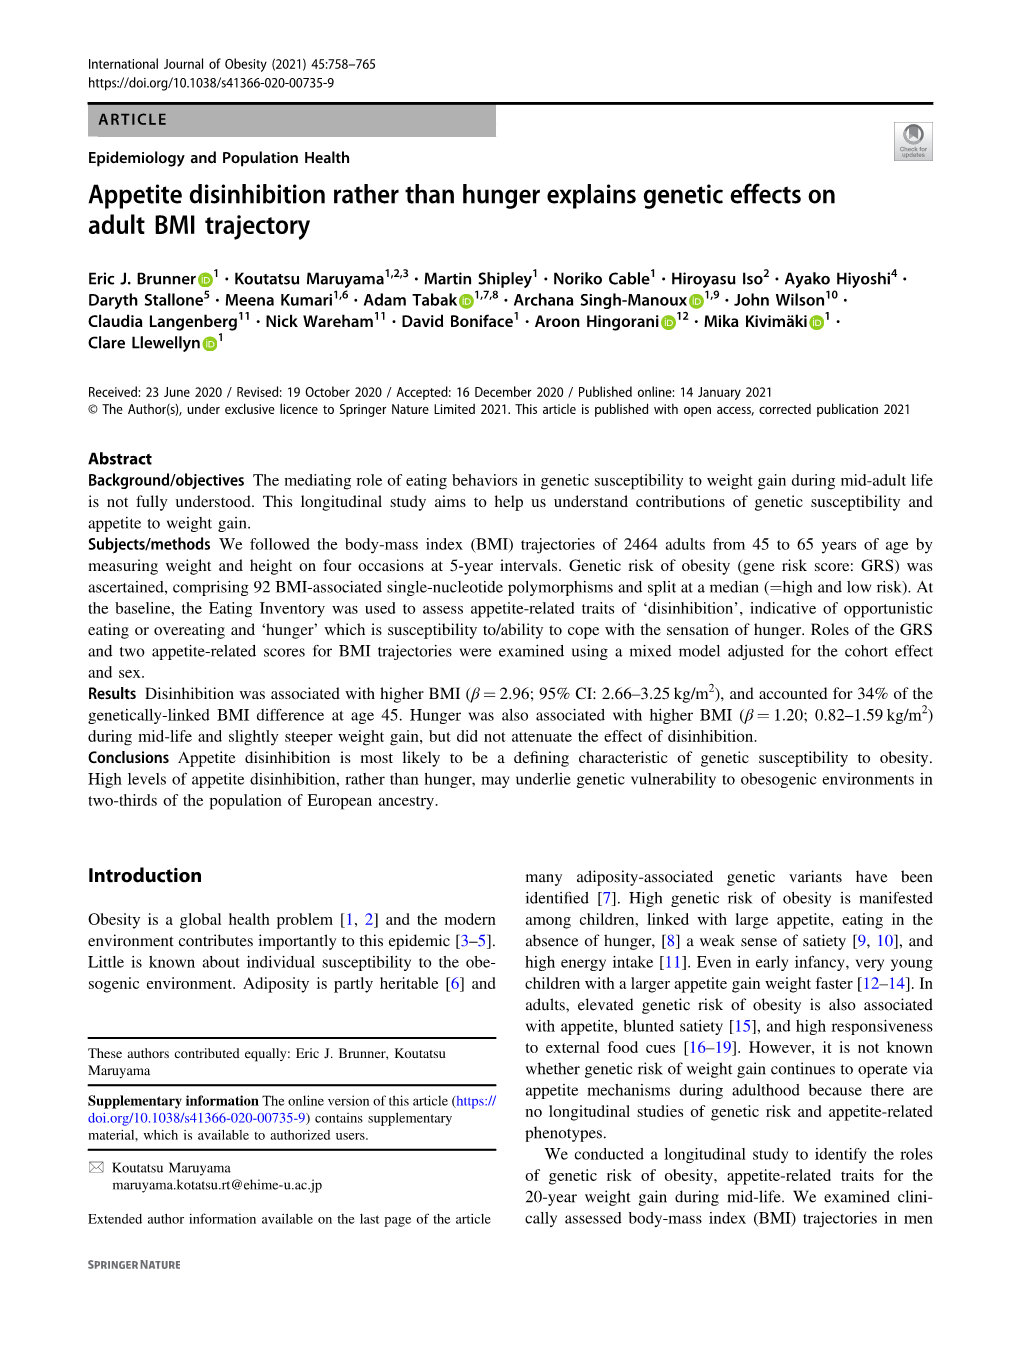 Appetite Disinhibition Rather Than Hunger Explains Genetic Effects on Adult BMI Trajectory